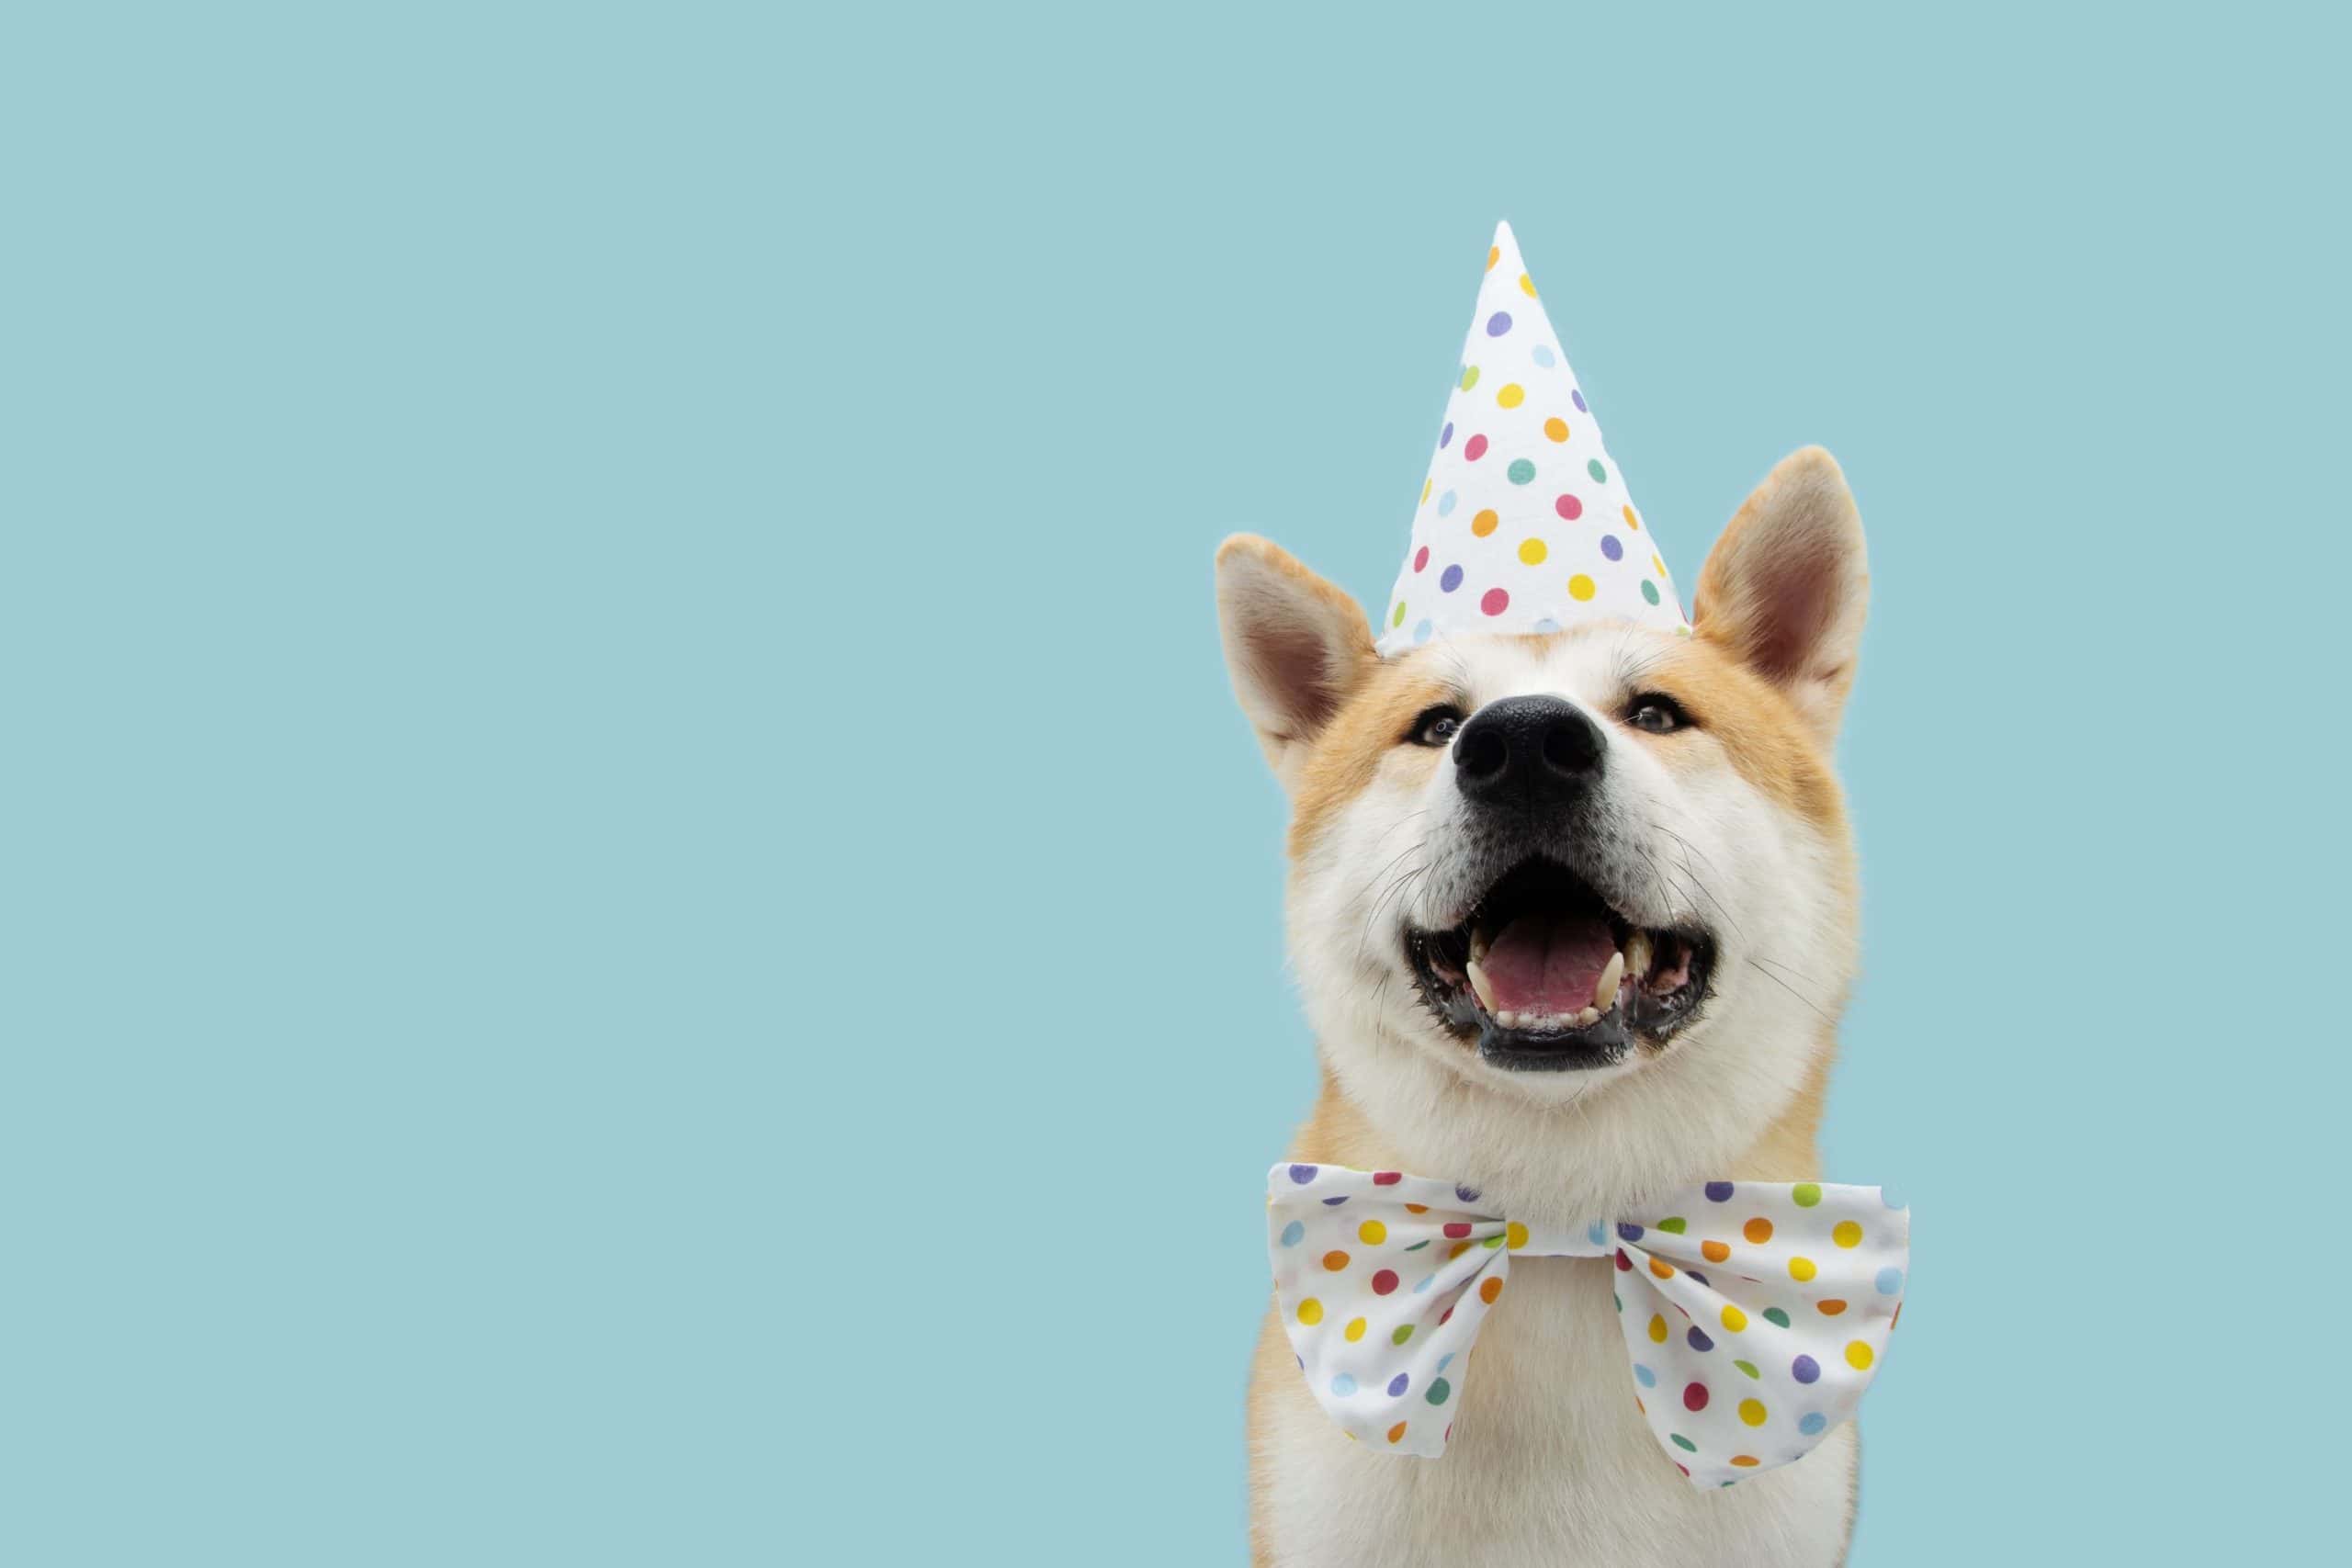 A dog in a party hat celebrating a pet birthday.